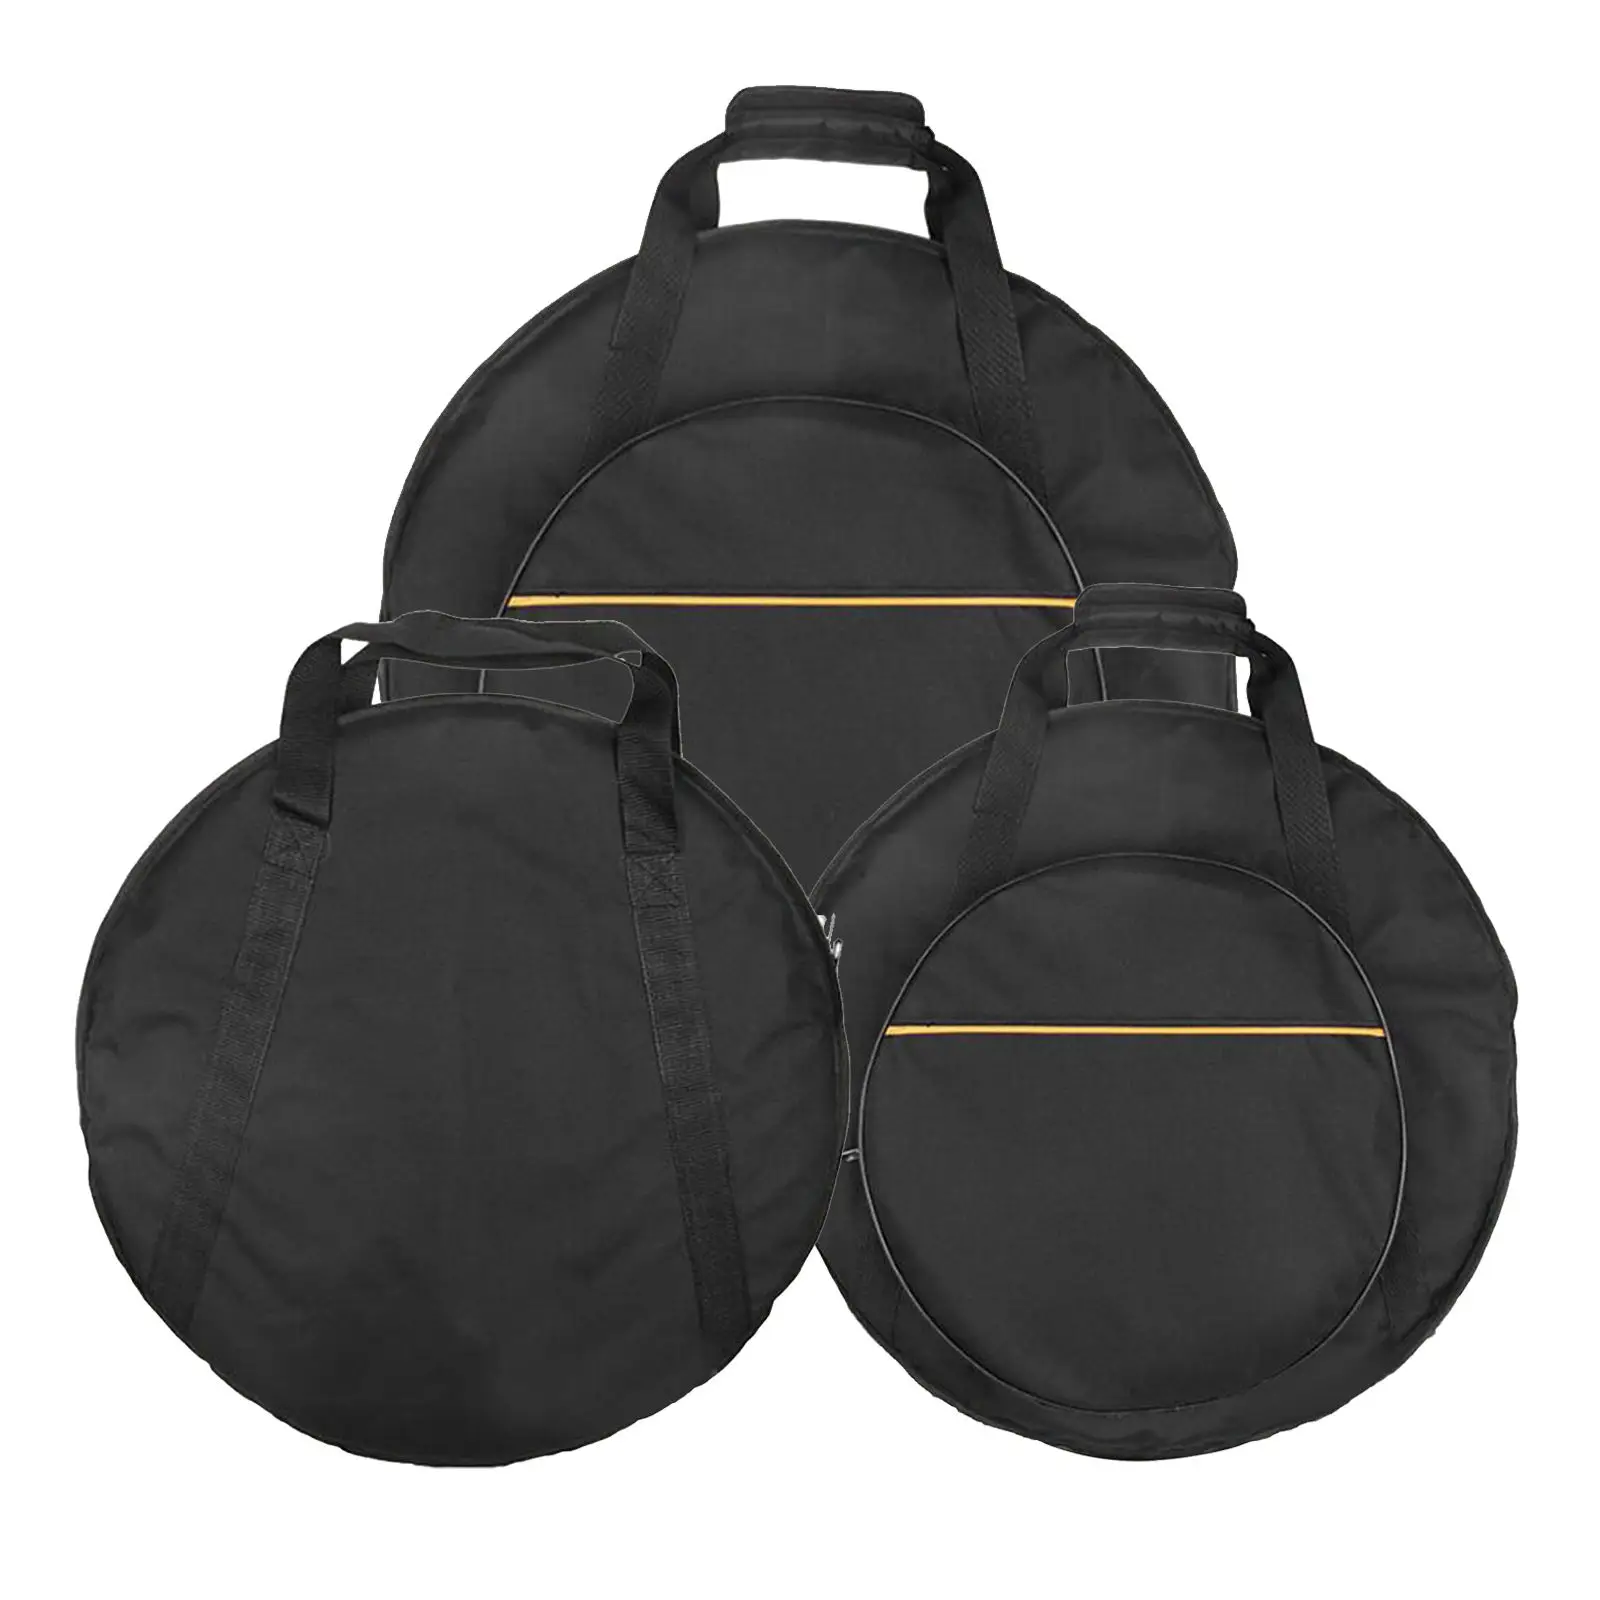 1x Oxford Cloth Cymbal Gig Bag with Dividers Dust-Proof Musical Instrument Storage Bag